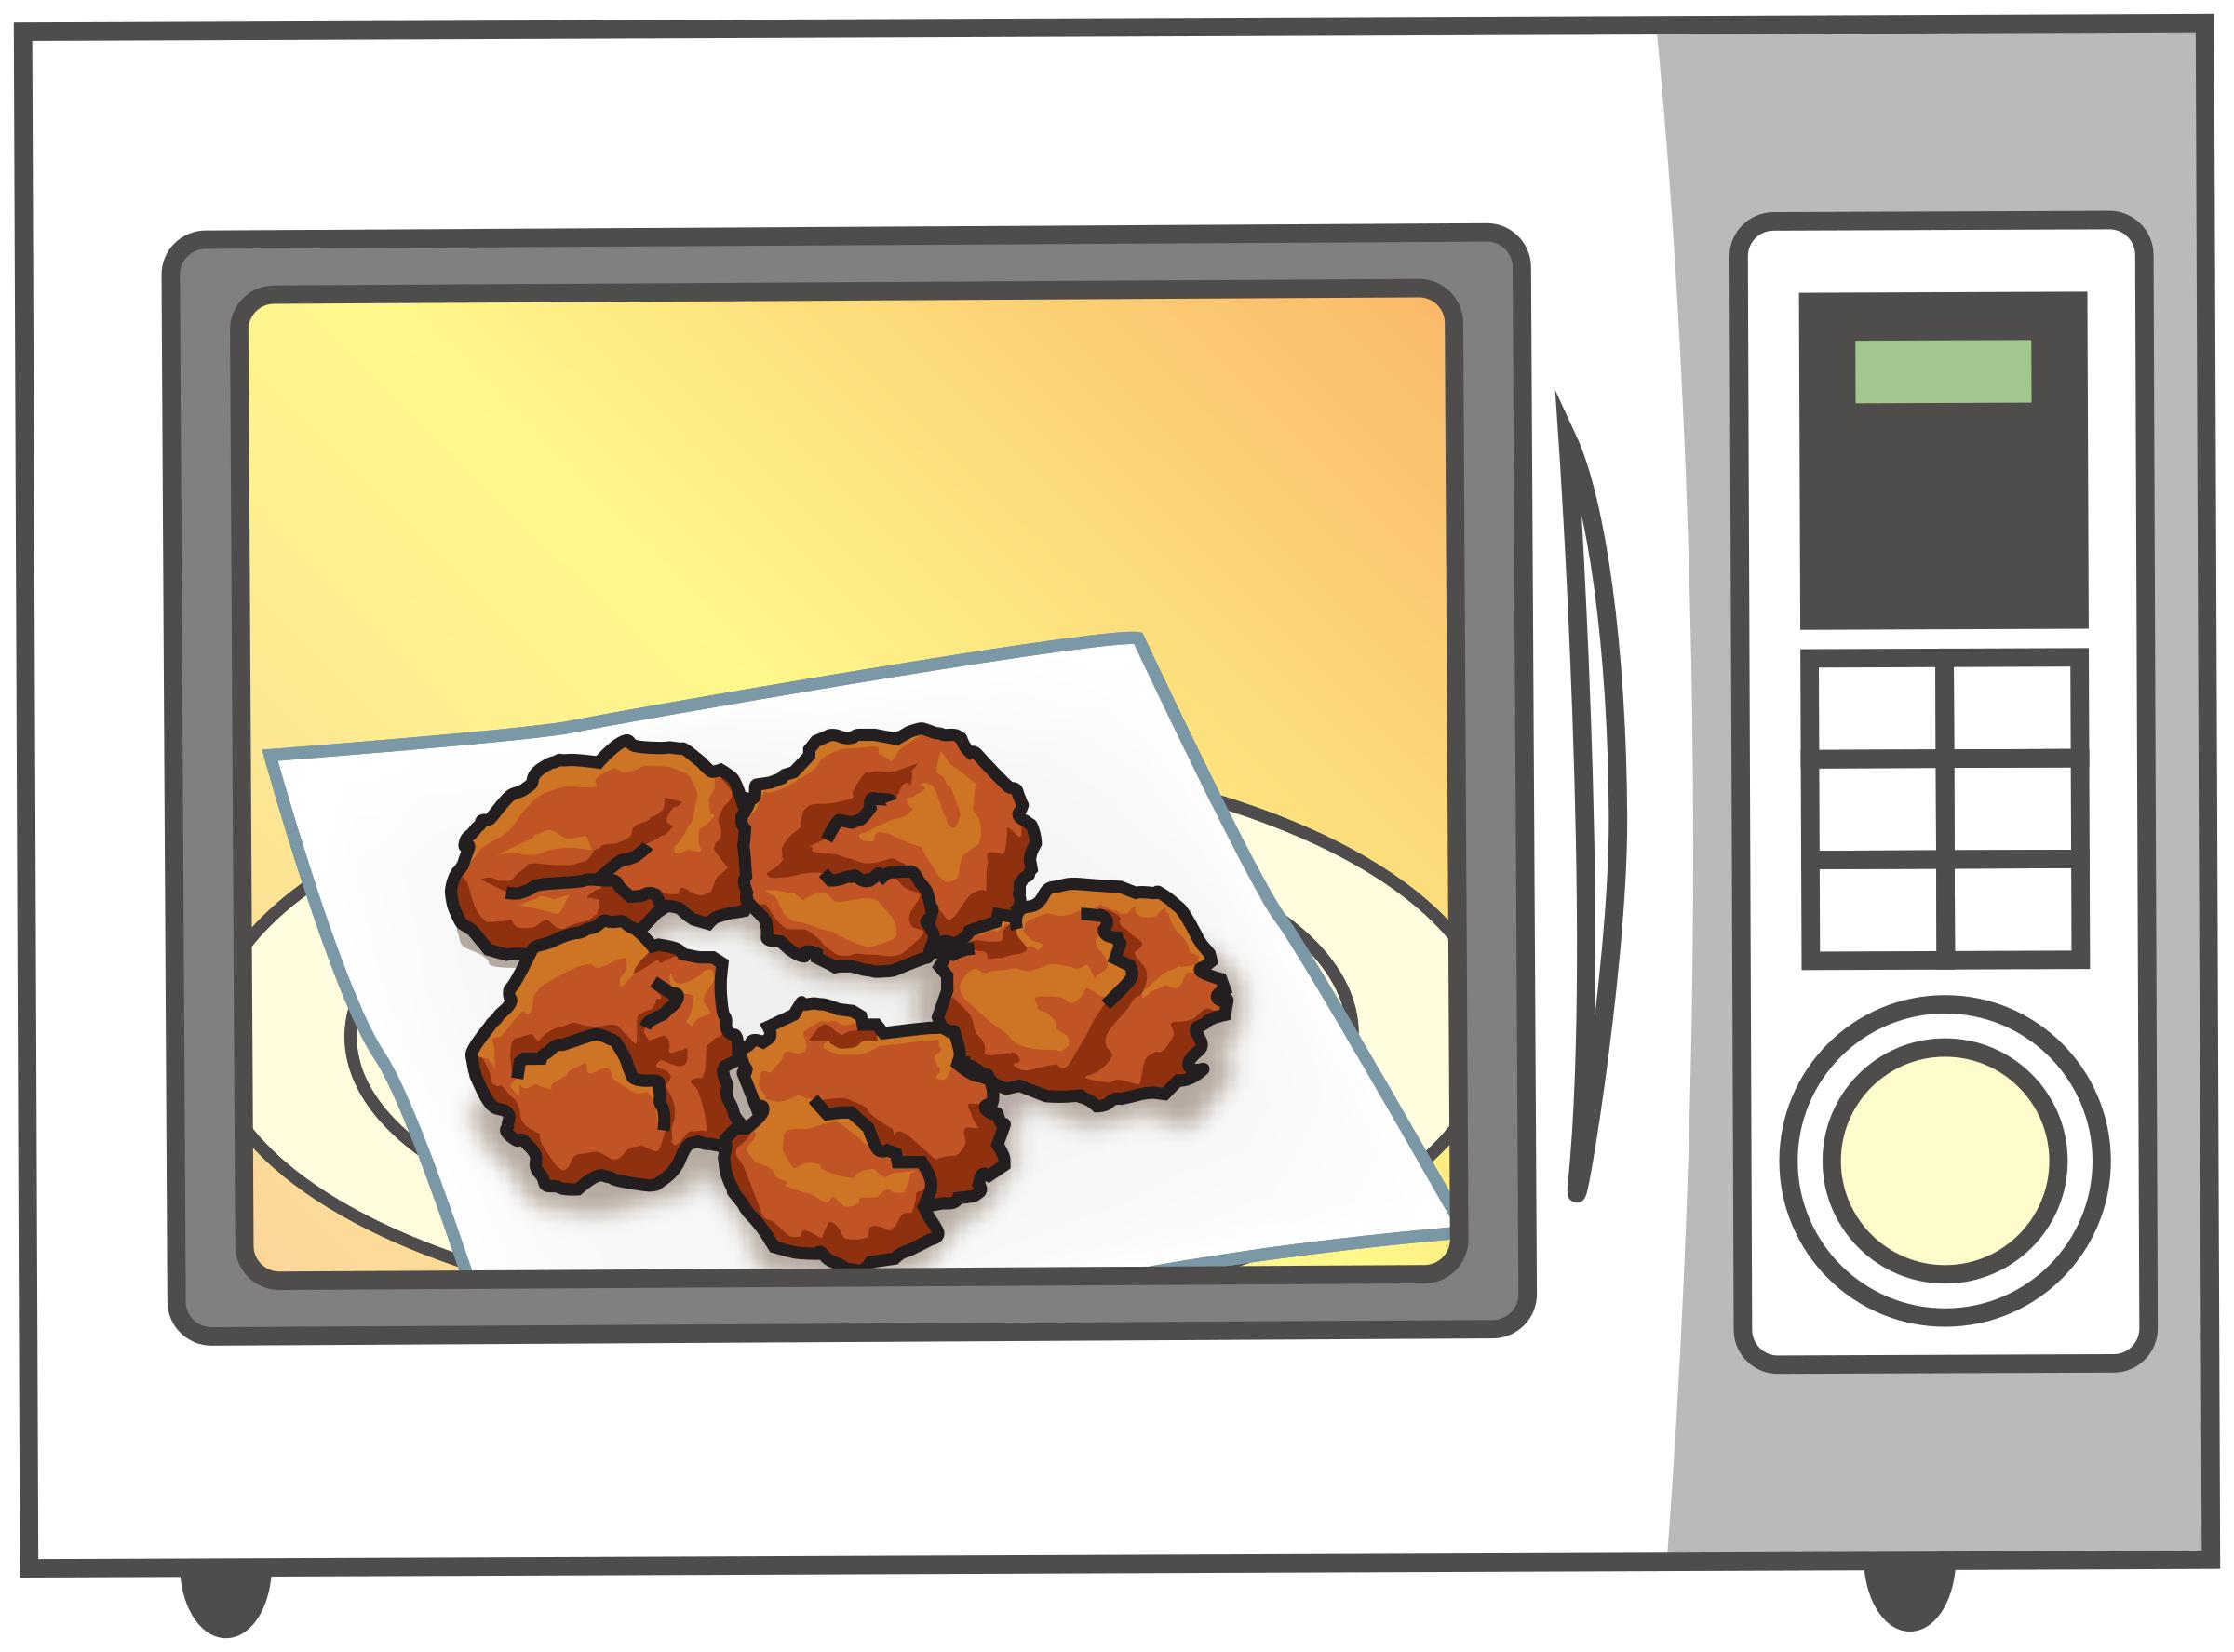 Simple microvawe oven with food inside - front view png